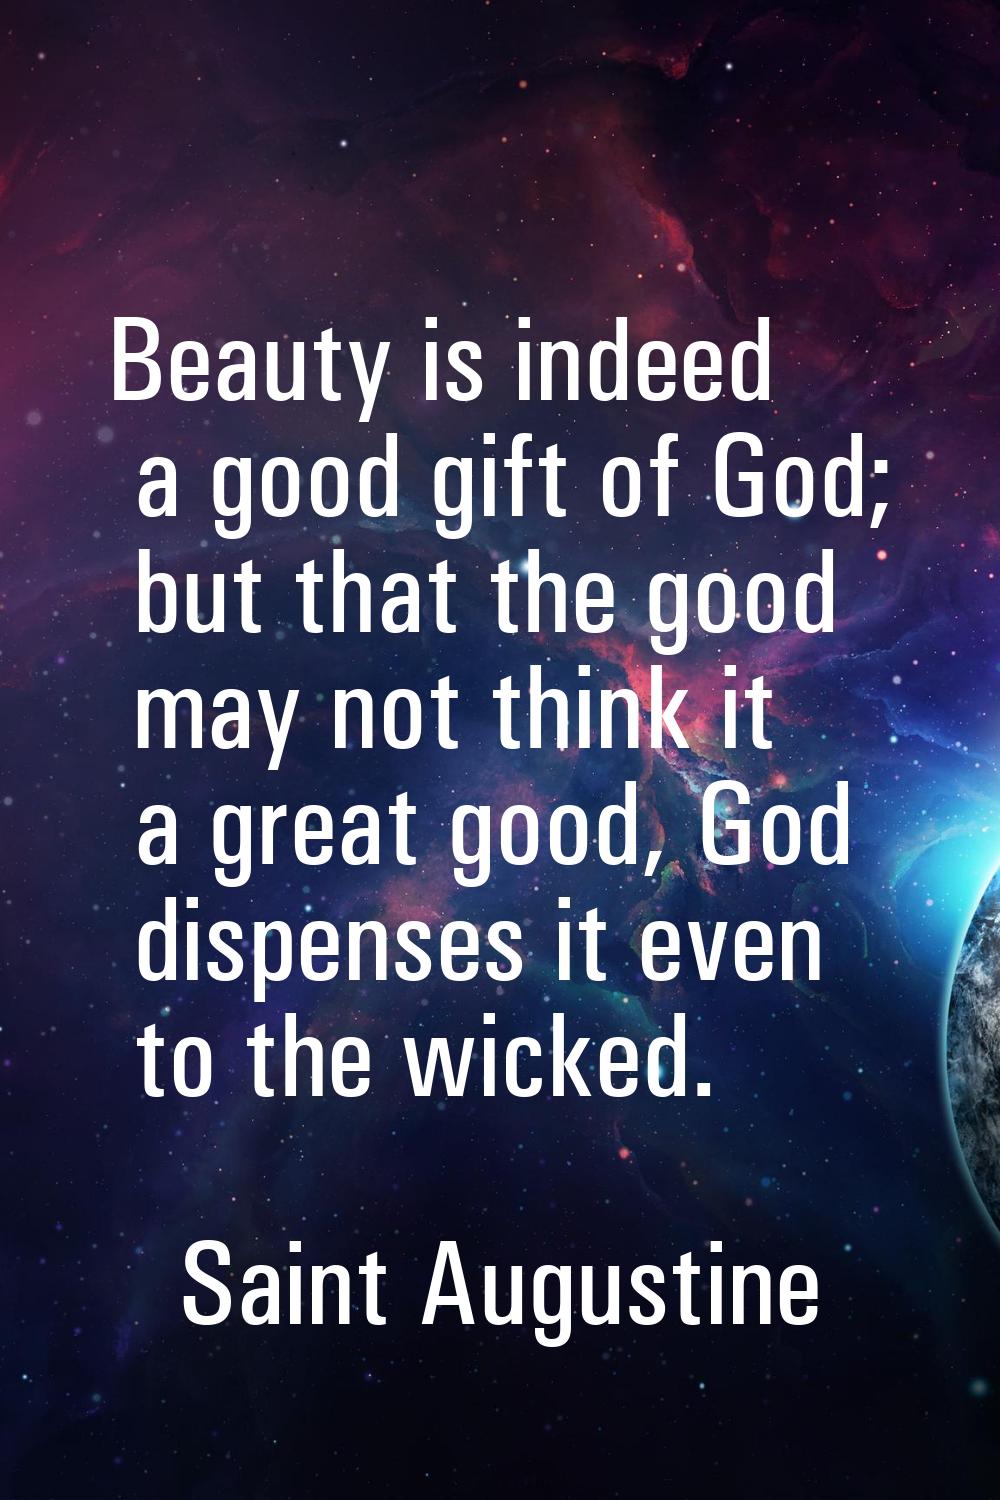 Beauty is indeed a good gift of God; but that the good may not think it a great good, God dispenses